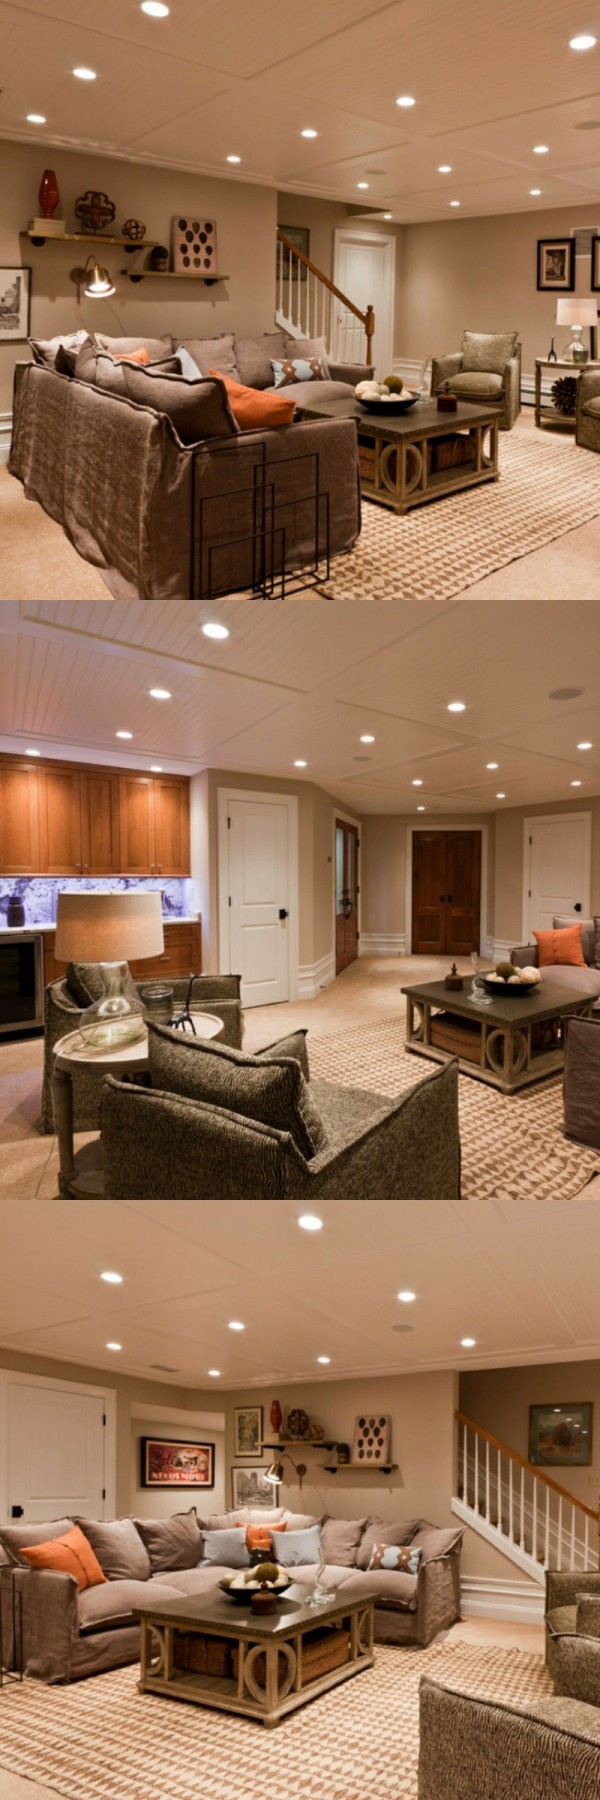 basement decorating ideas for family room